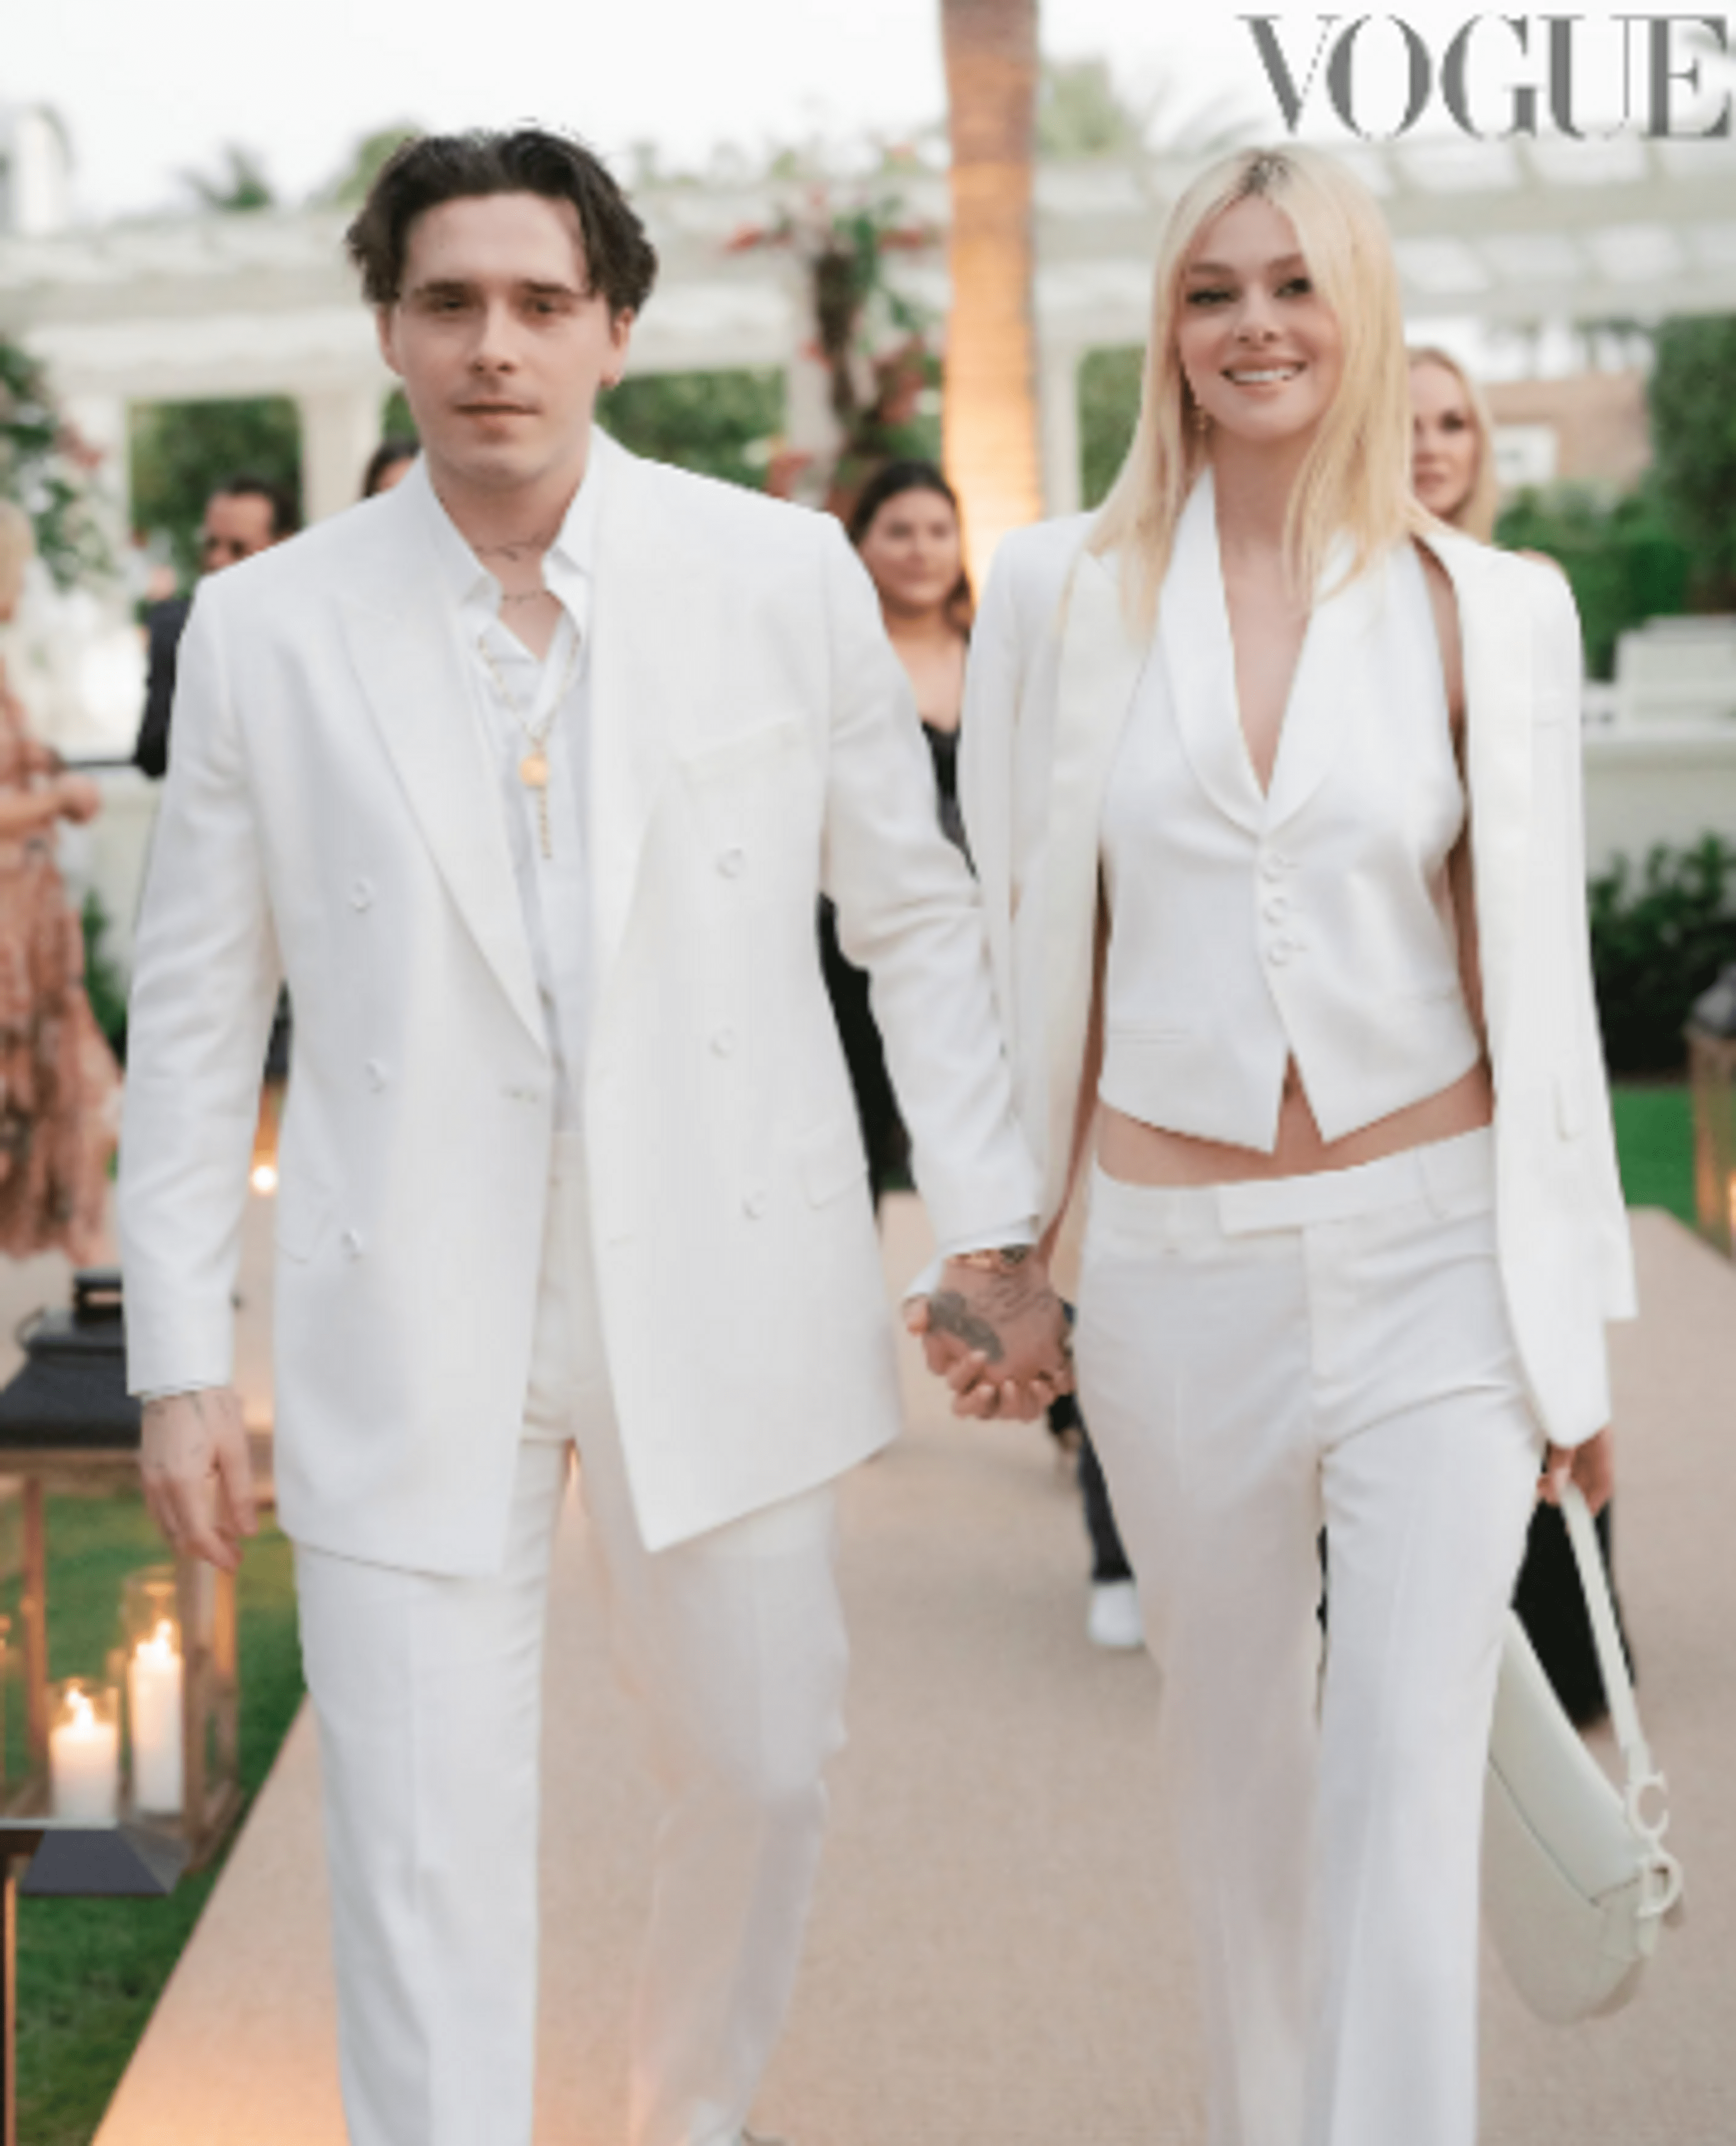 british-vogue-has-published-new-photos-and-details-from-the-wedding-of-brooklyn-beckham-and-nicola-peltz